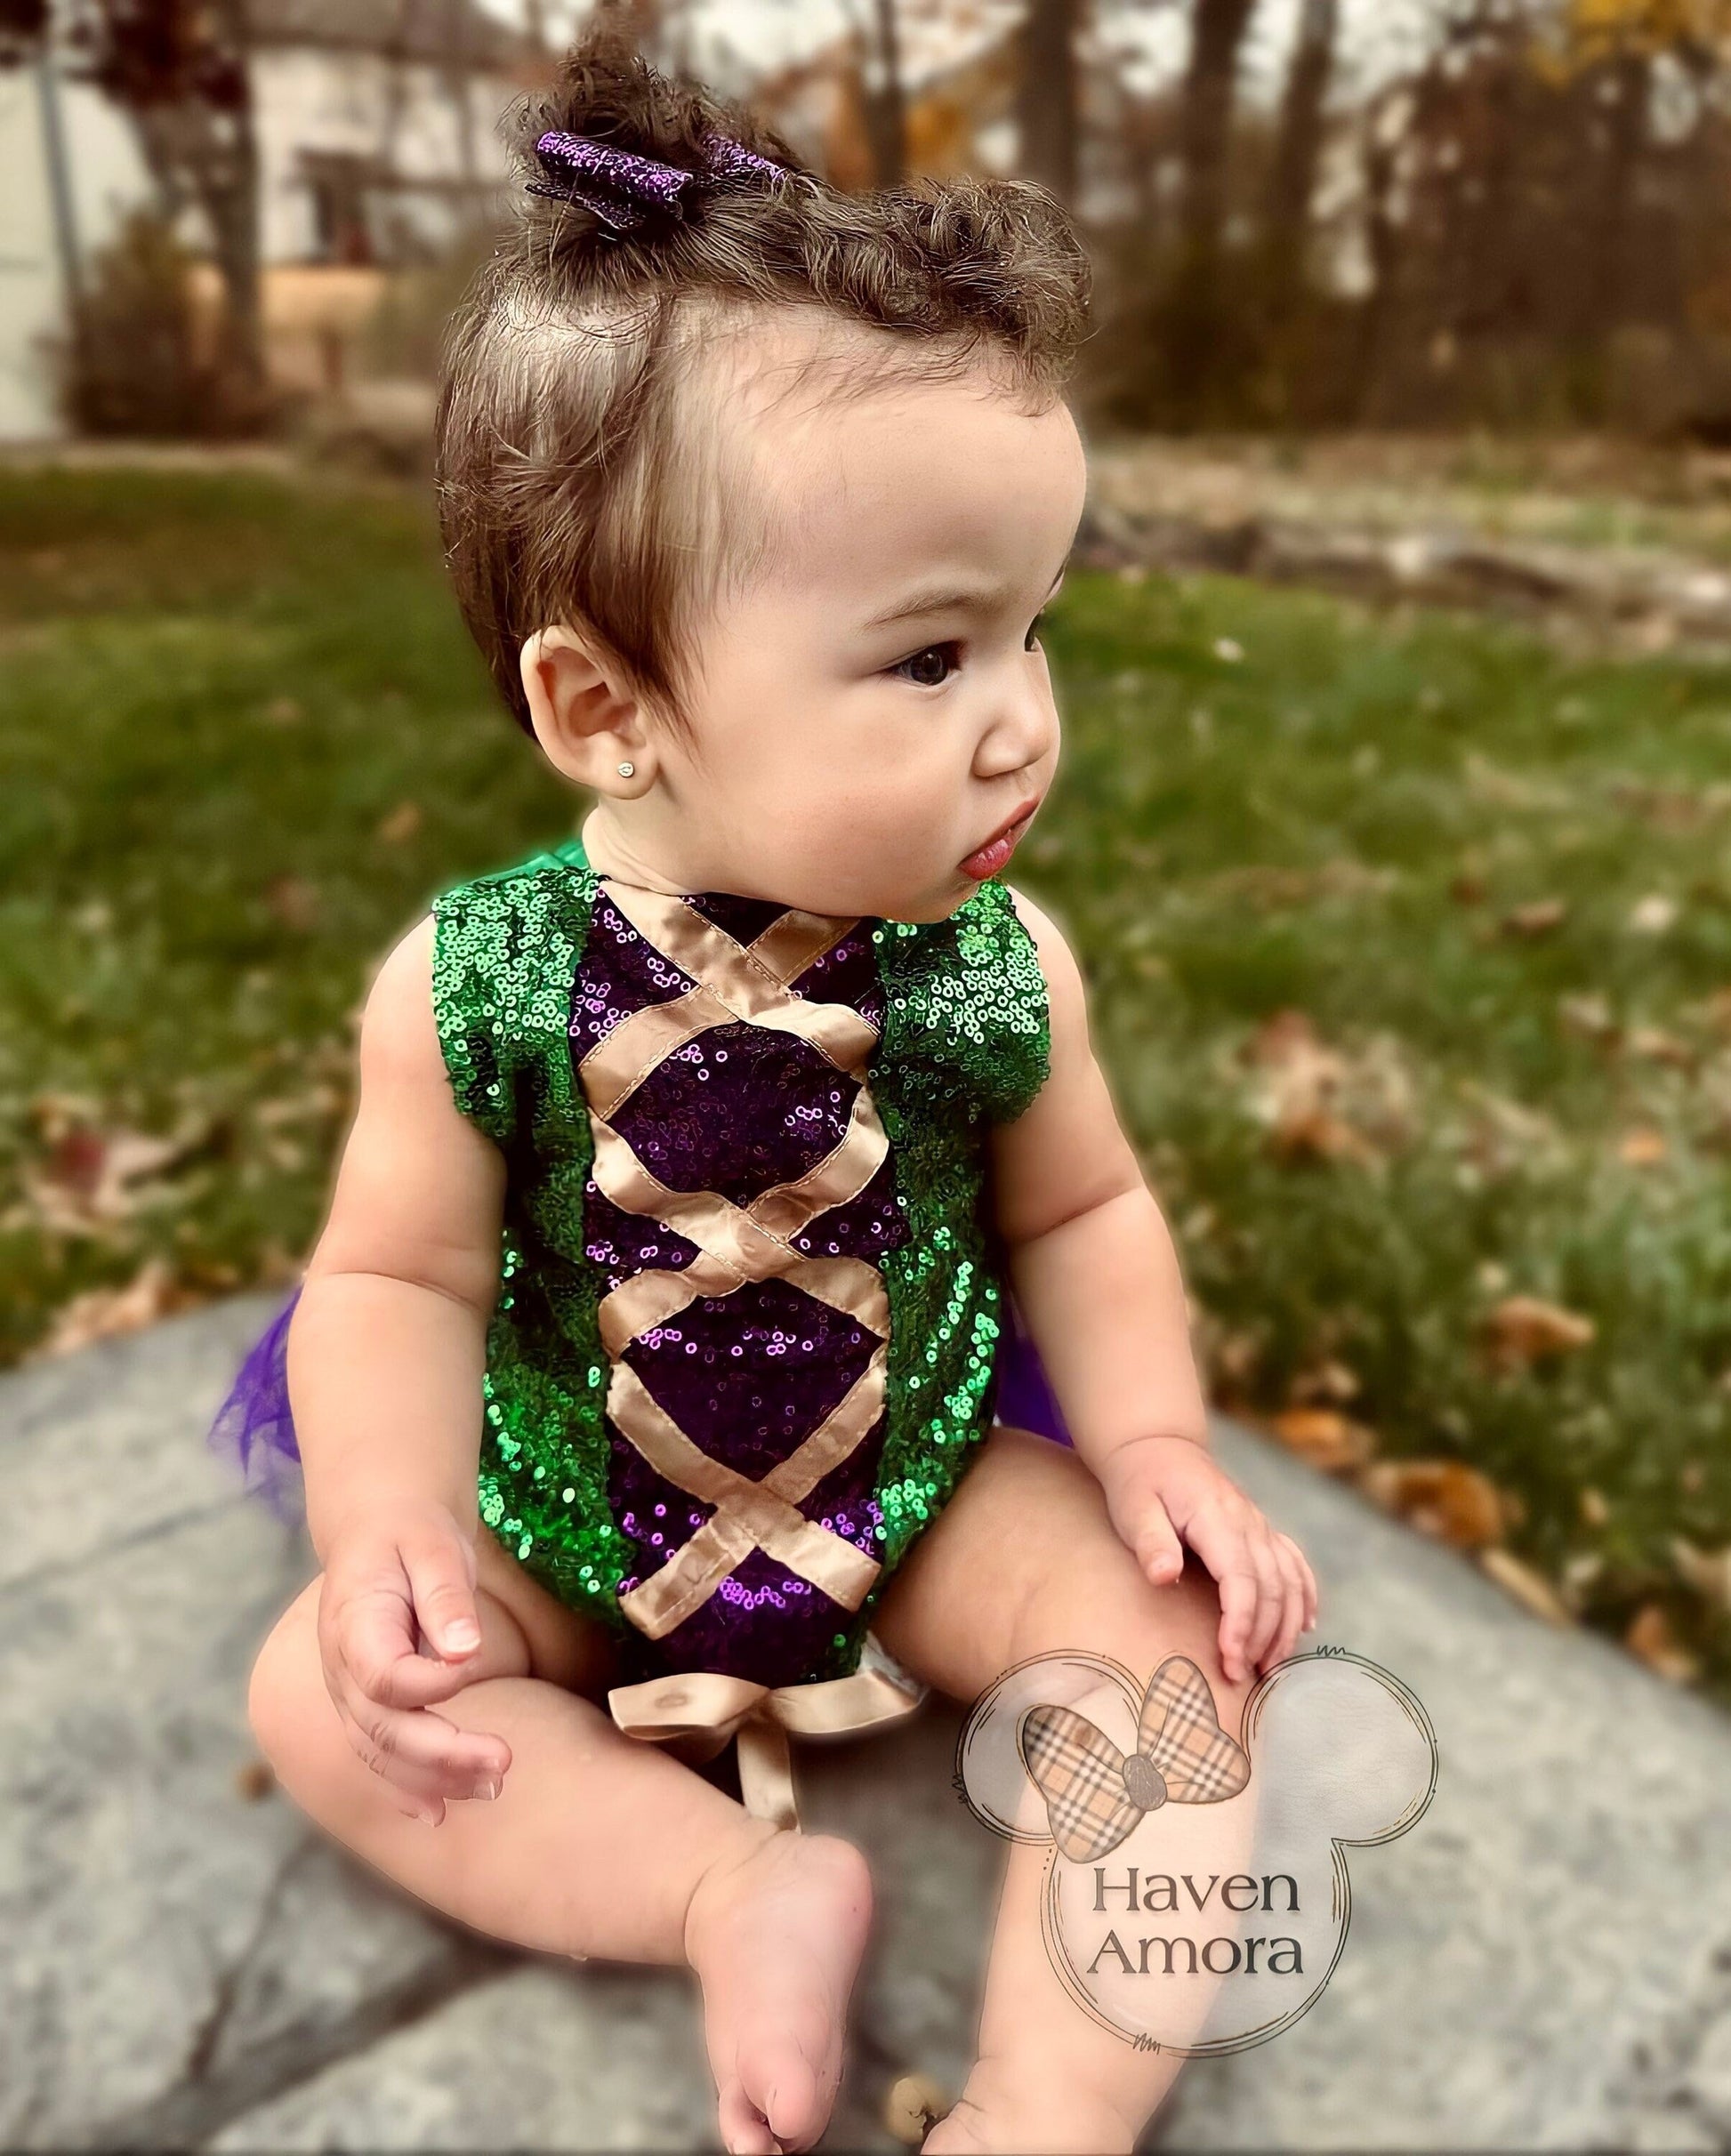 Hocus Pocus Sisters Winifred 0-18M Infant Baby Girls Romper Dress For Halloweens Color Patchwork Sequins SleevelessLace Backless Jumpsuits